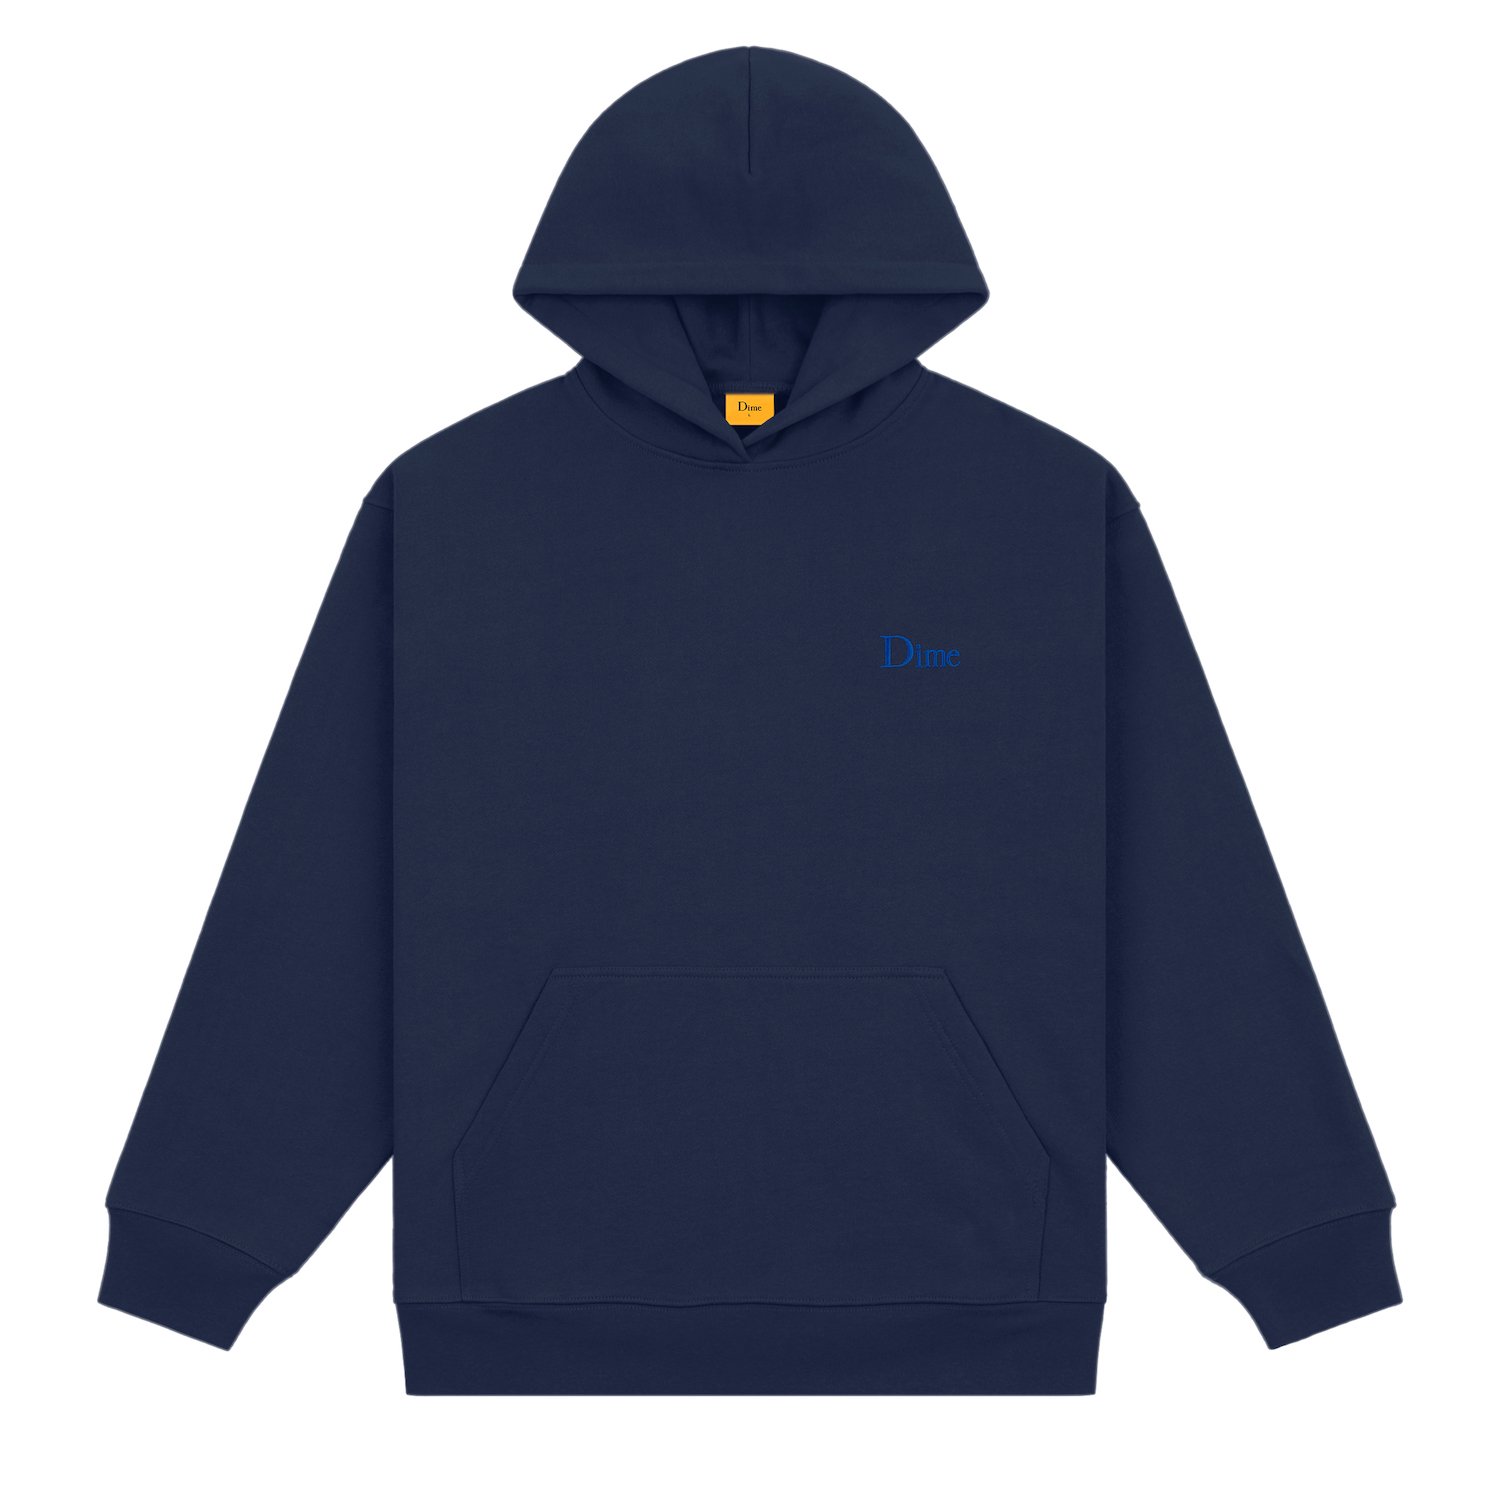 DIME<br>CLASSIC SMALL LOGO HOODIE<br>